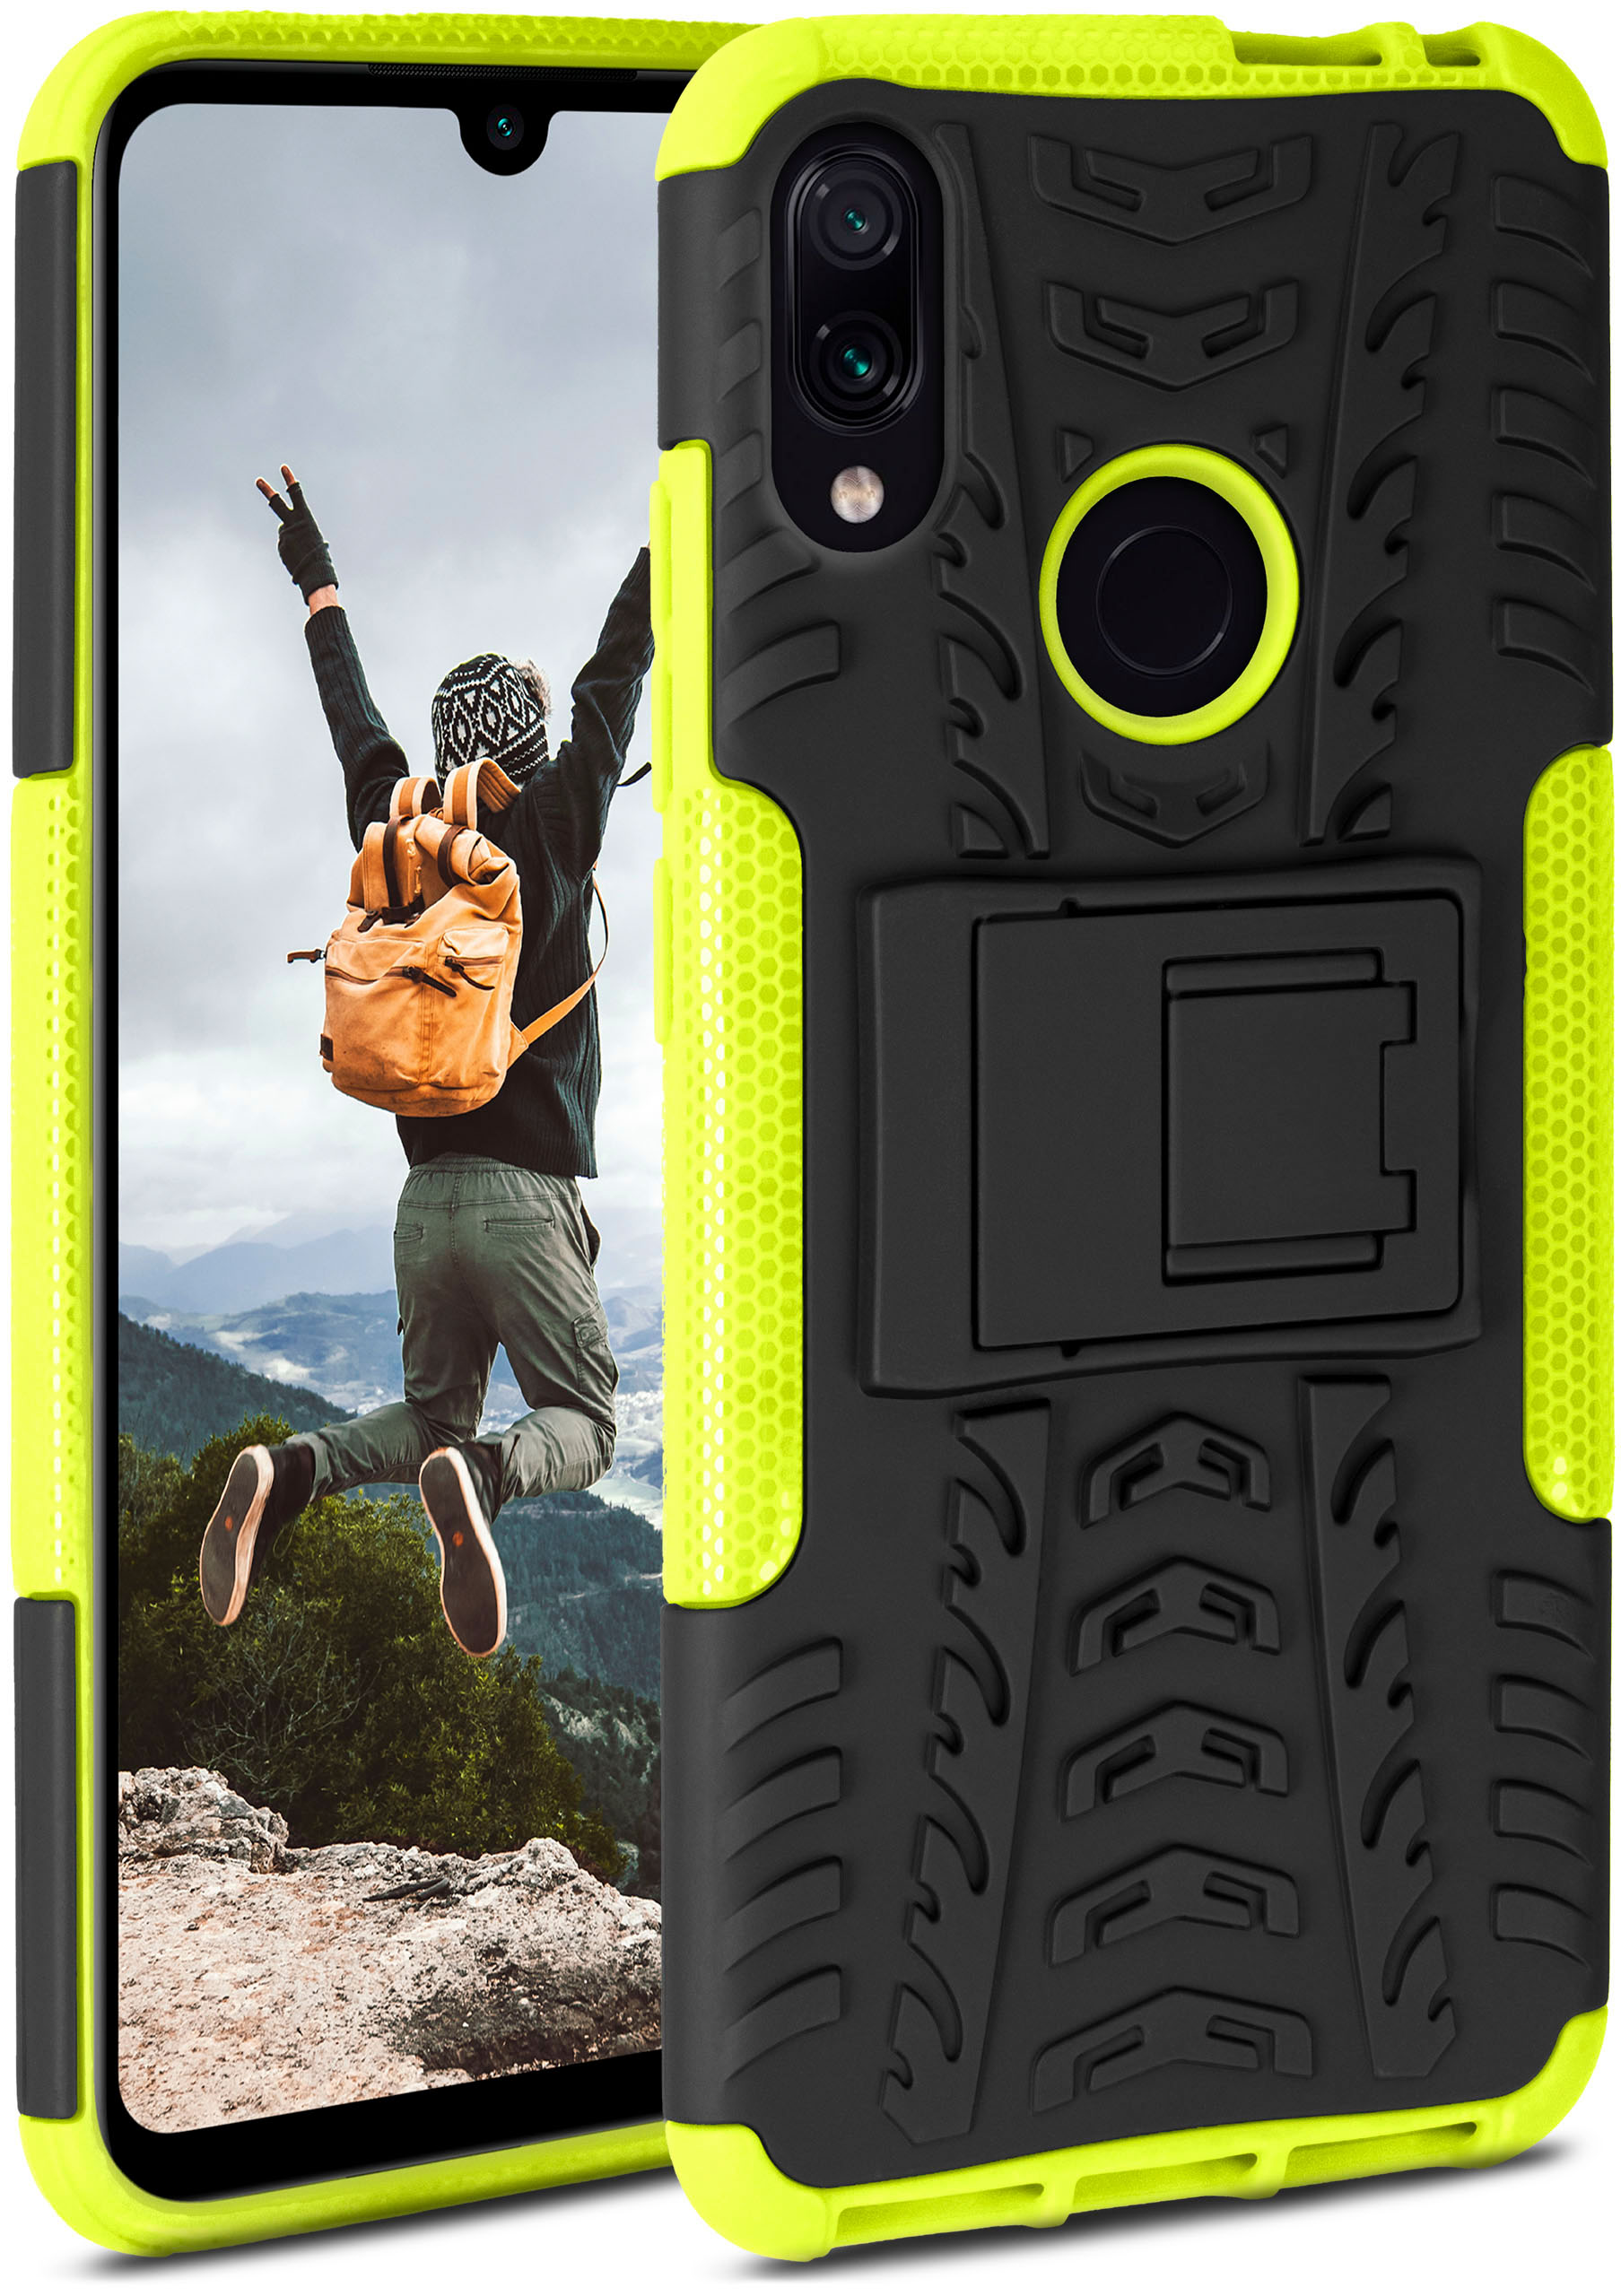 ONEFLOW Tank Backcover, Pro Case, Note / 7S, Lime 7/ 7 Note Xiaomi, Redmi